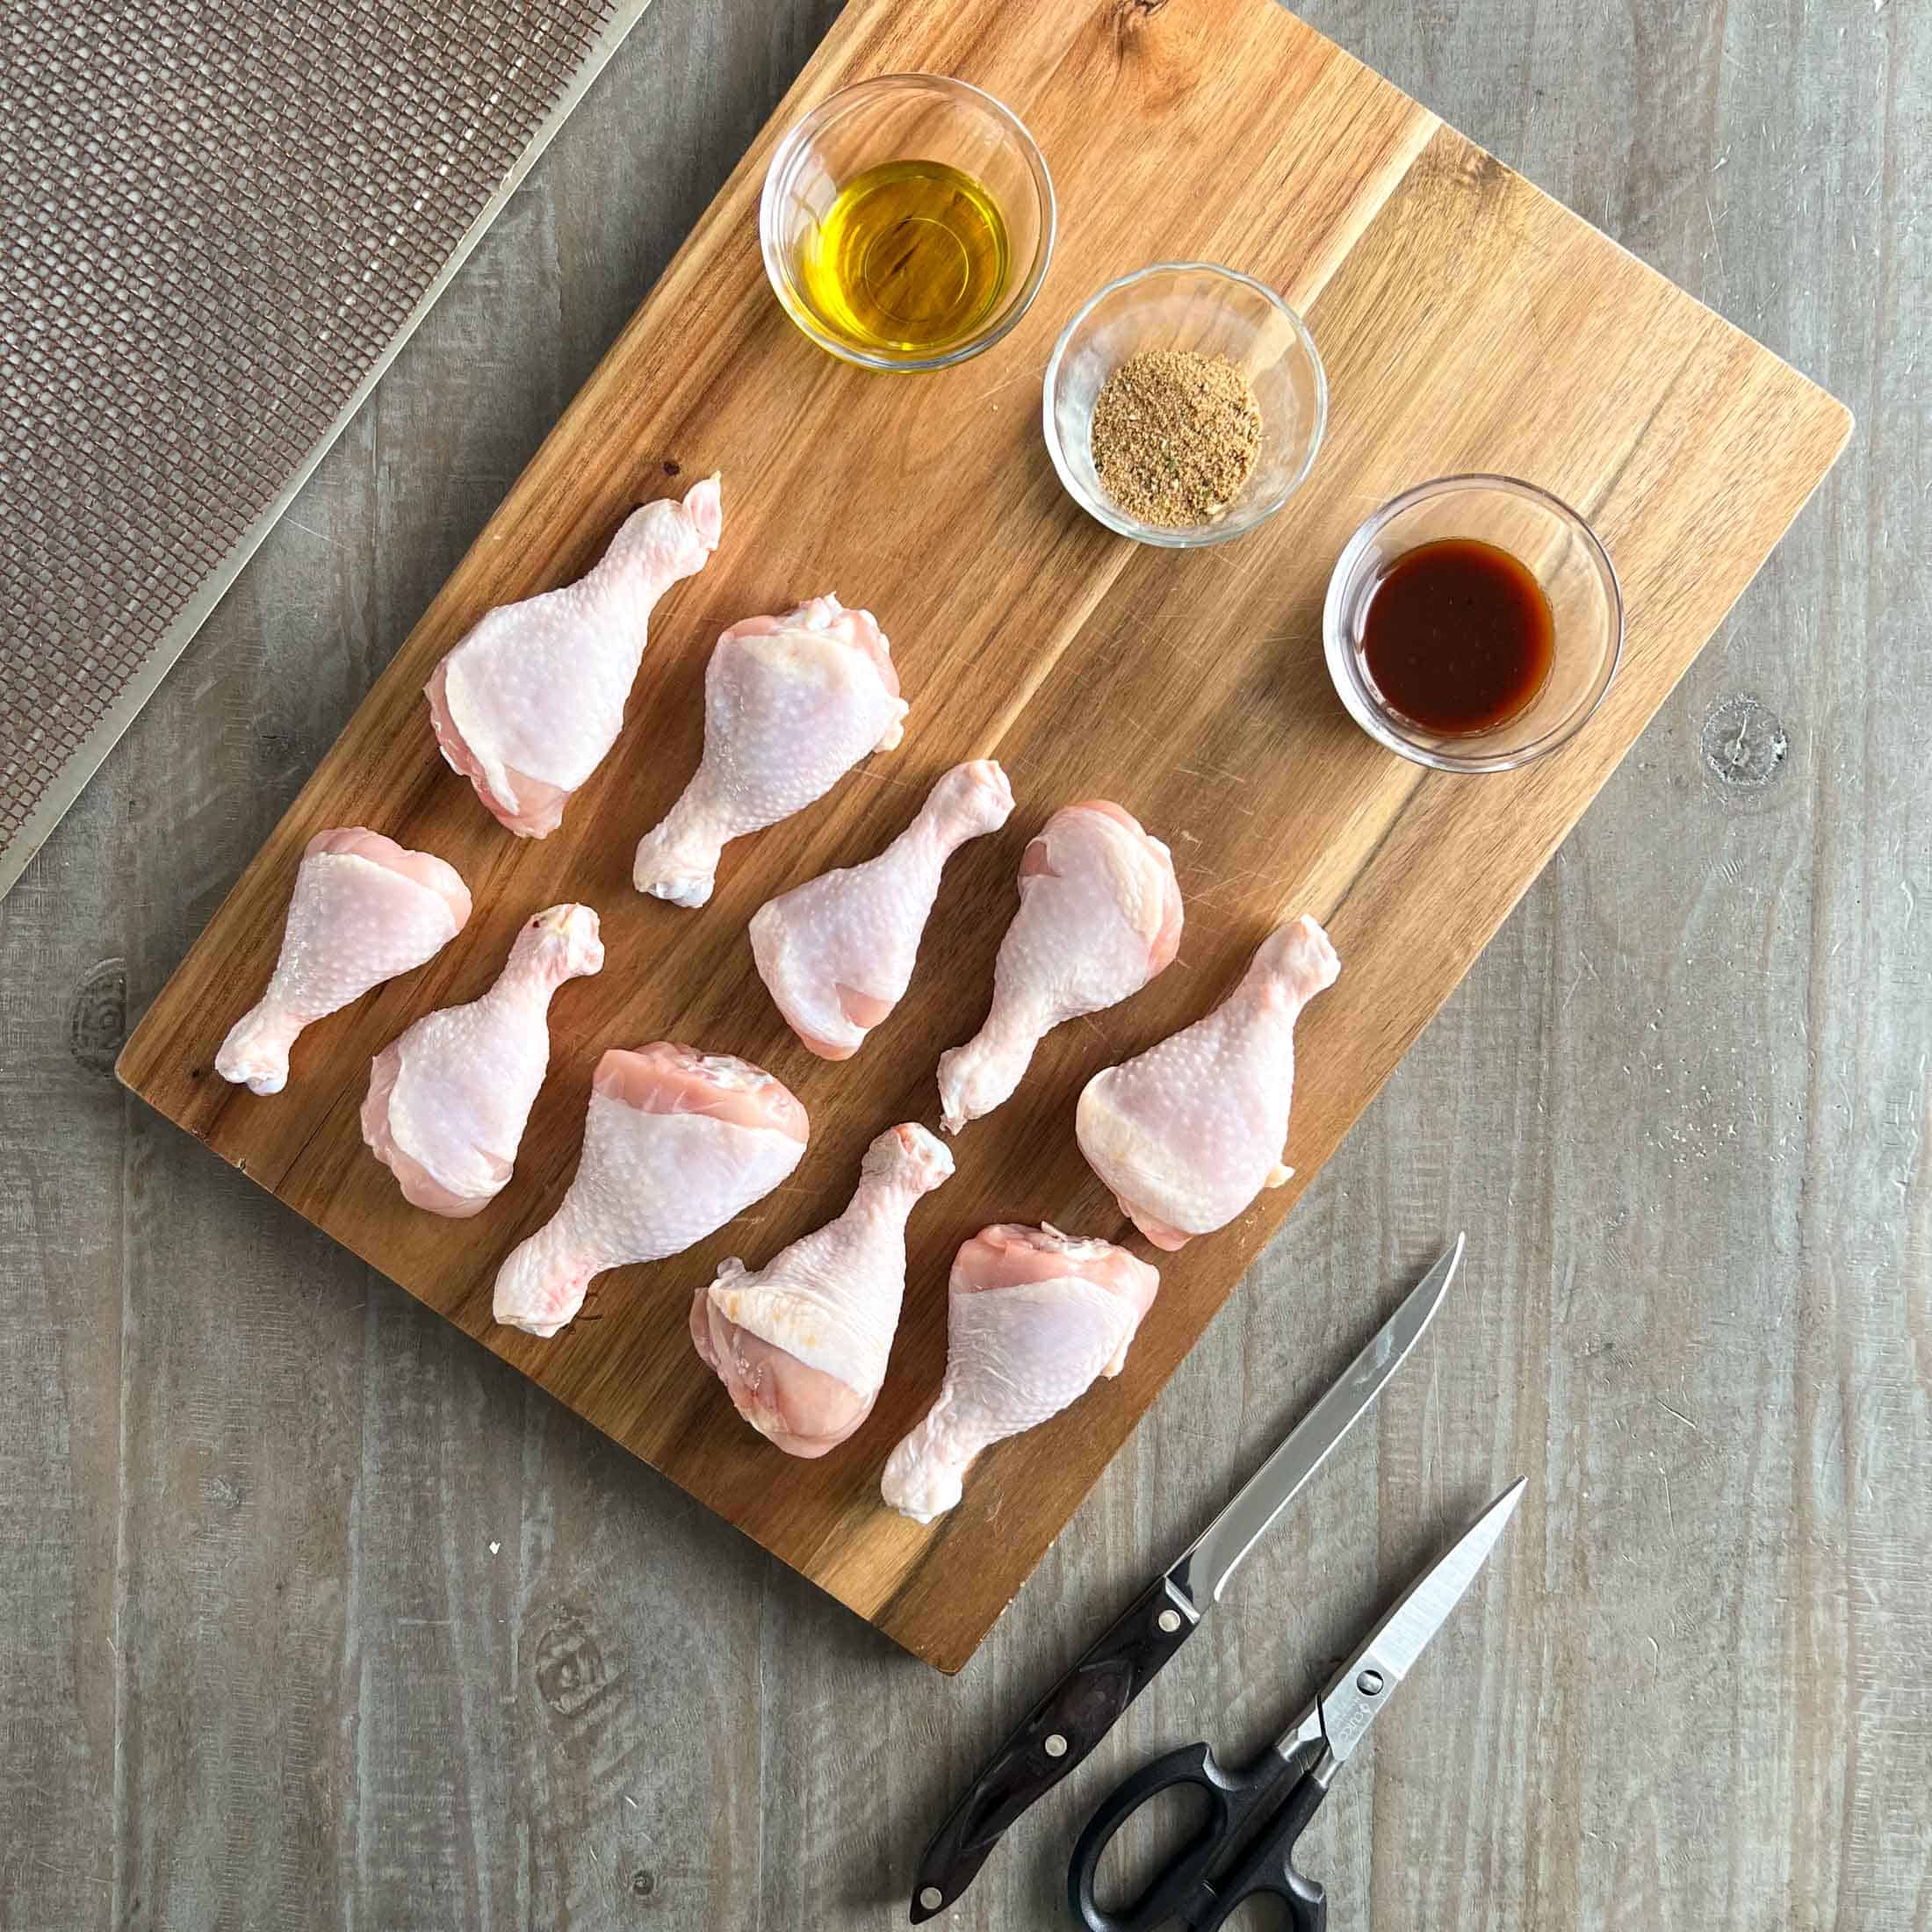 Ten drumsticks, olive oil, chicken rub, and barbecue sauce on a wooden board.